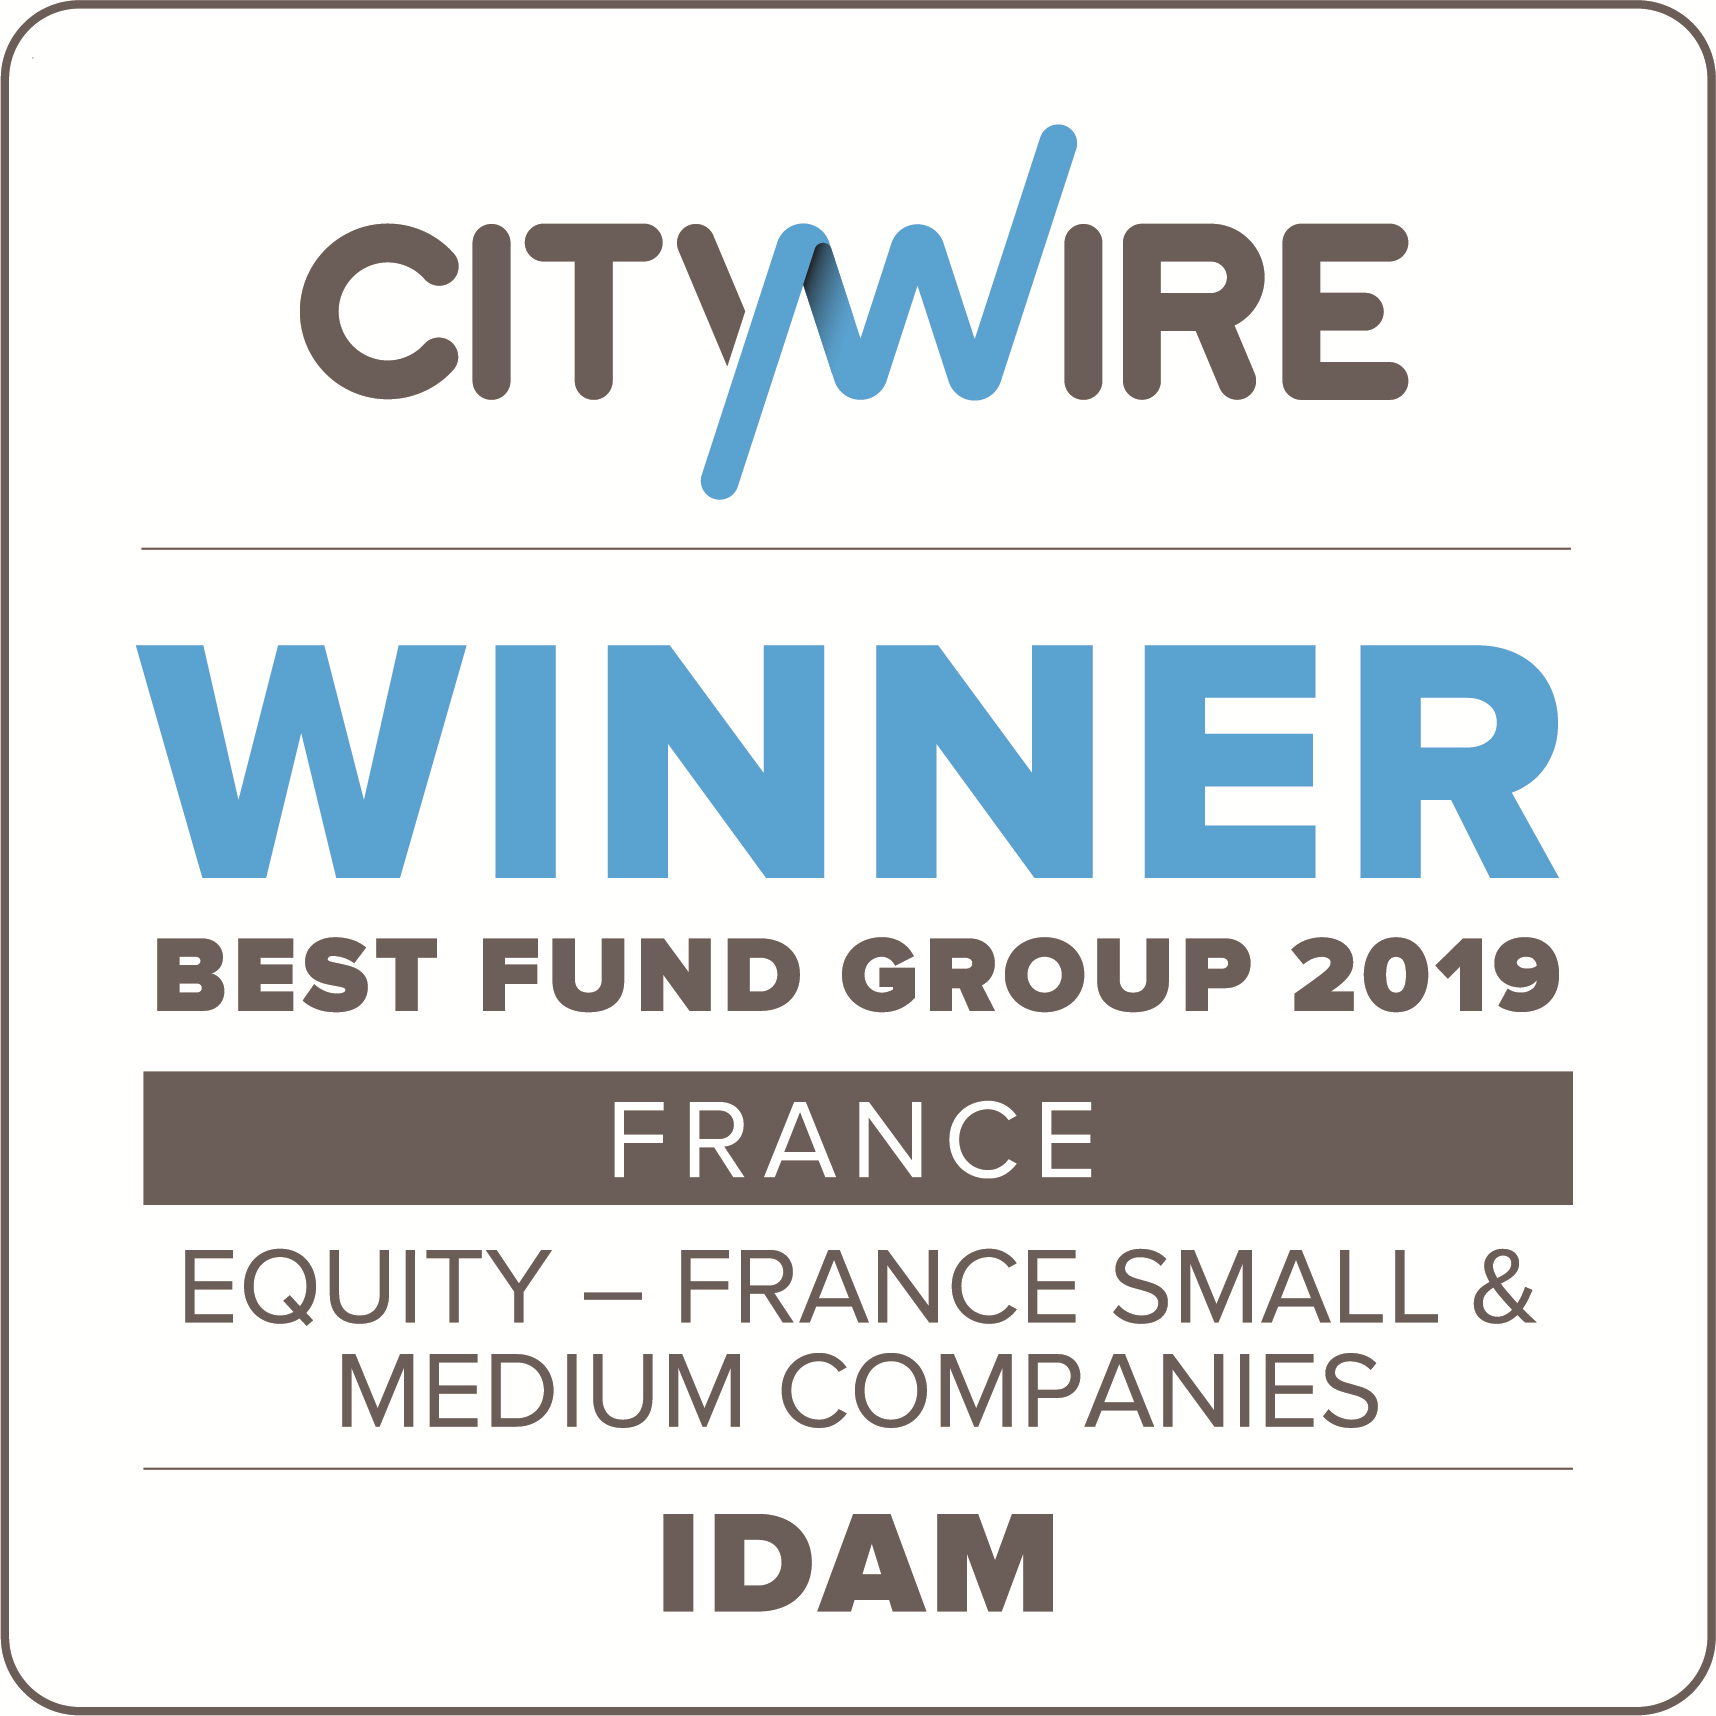 france eq-f-sm-med-cos idam-2019 citywire outline-002